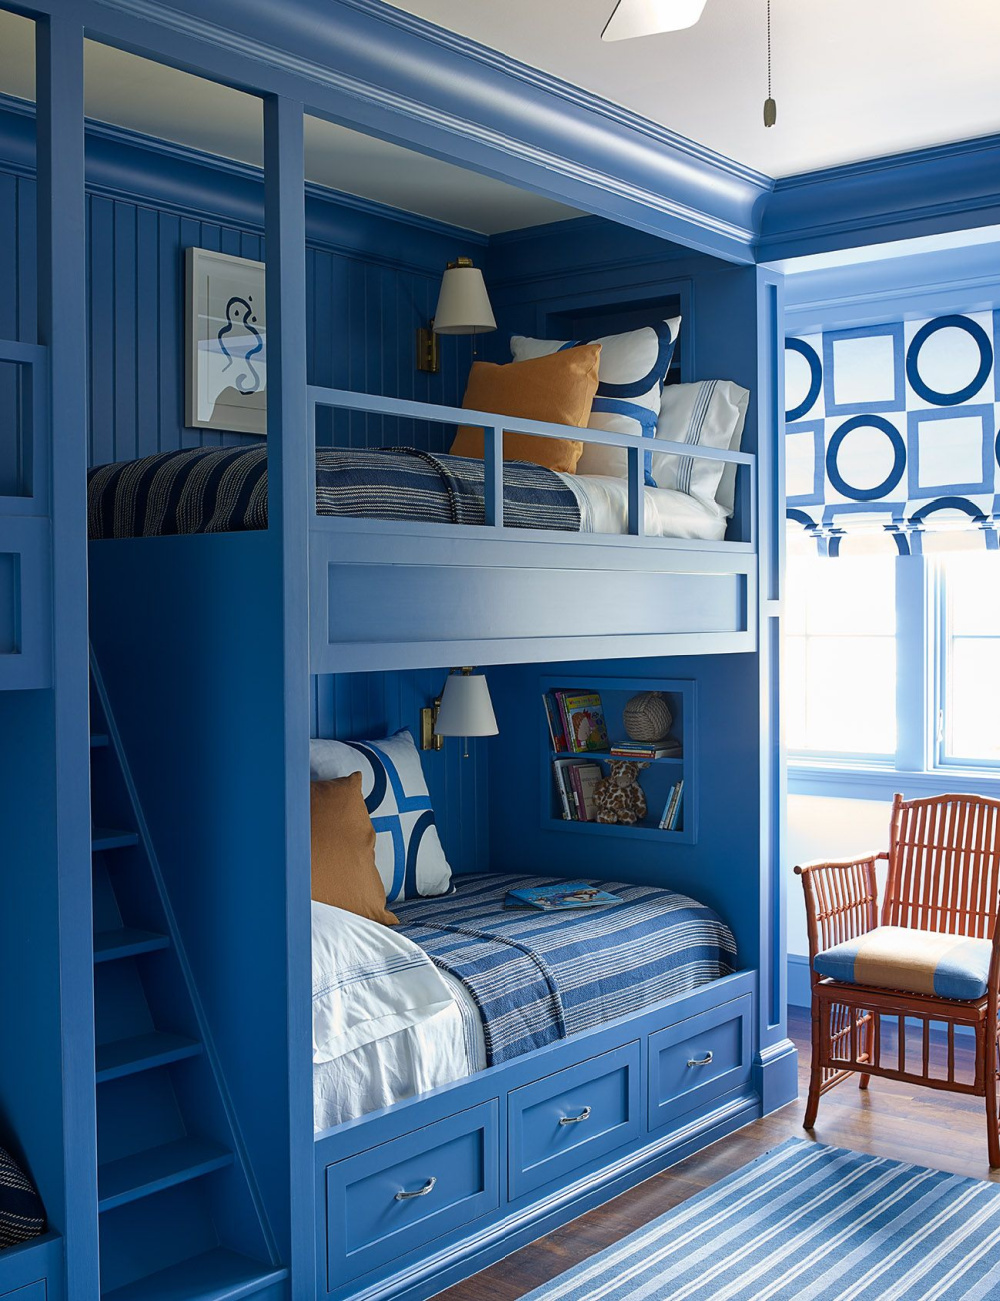 Bold blue bunk room designed by Suzanne Kasler in The Bunk Bed Book (Gibbs Smith, 2022) by Laura Fenton. #bunkbeds